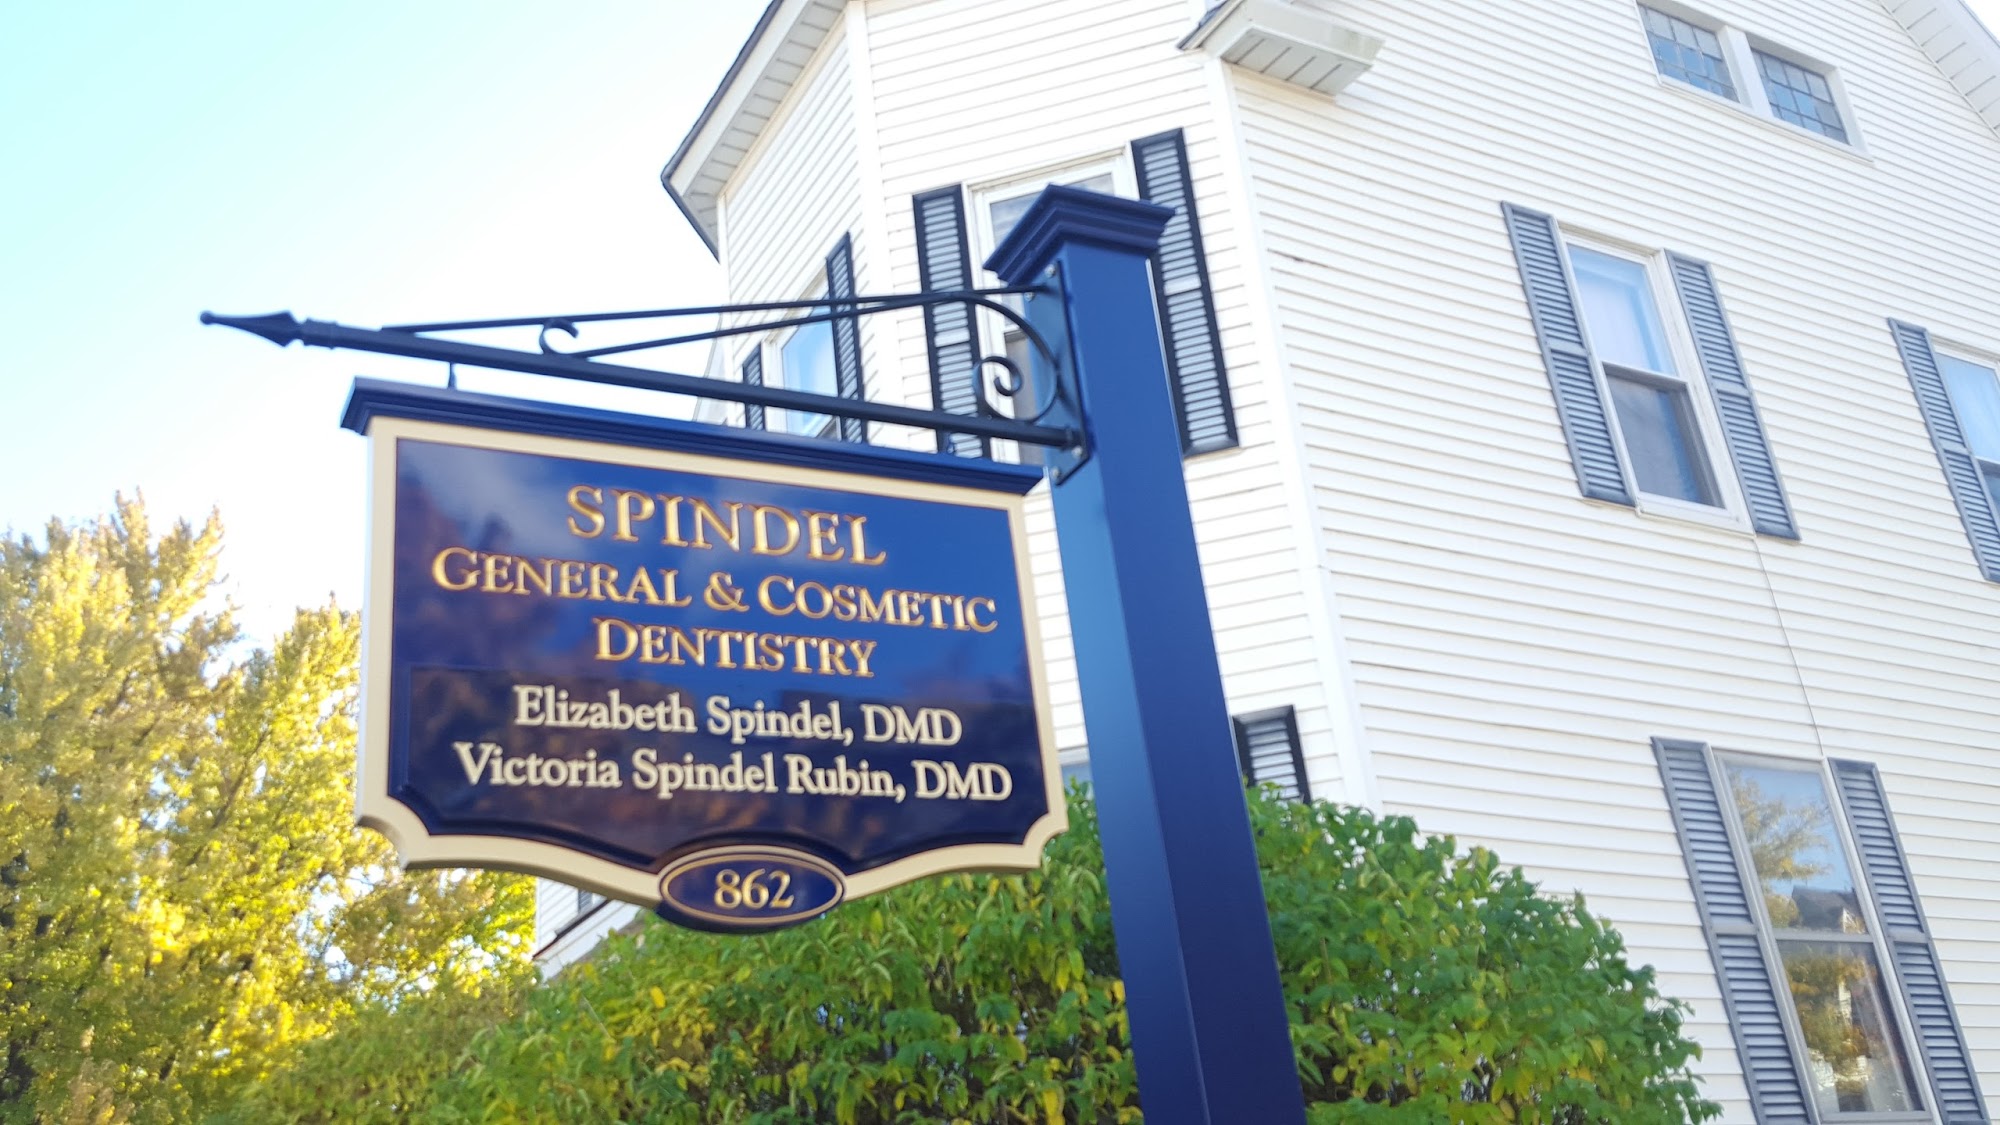 Spindel General and Cosmetic Dentistry